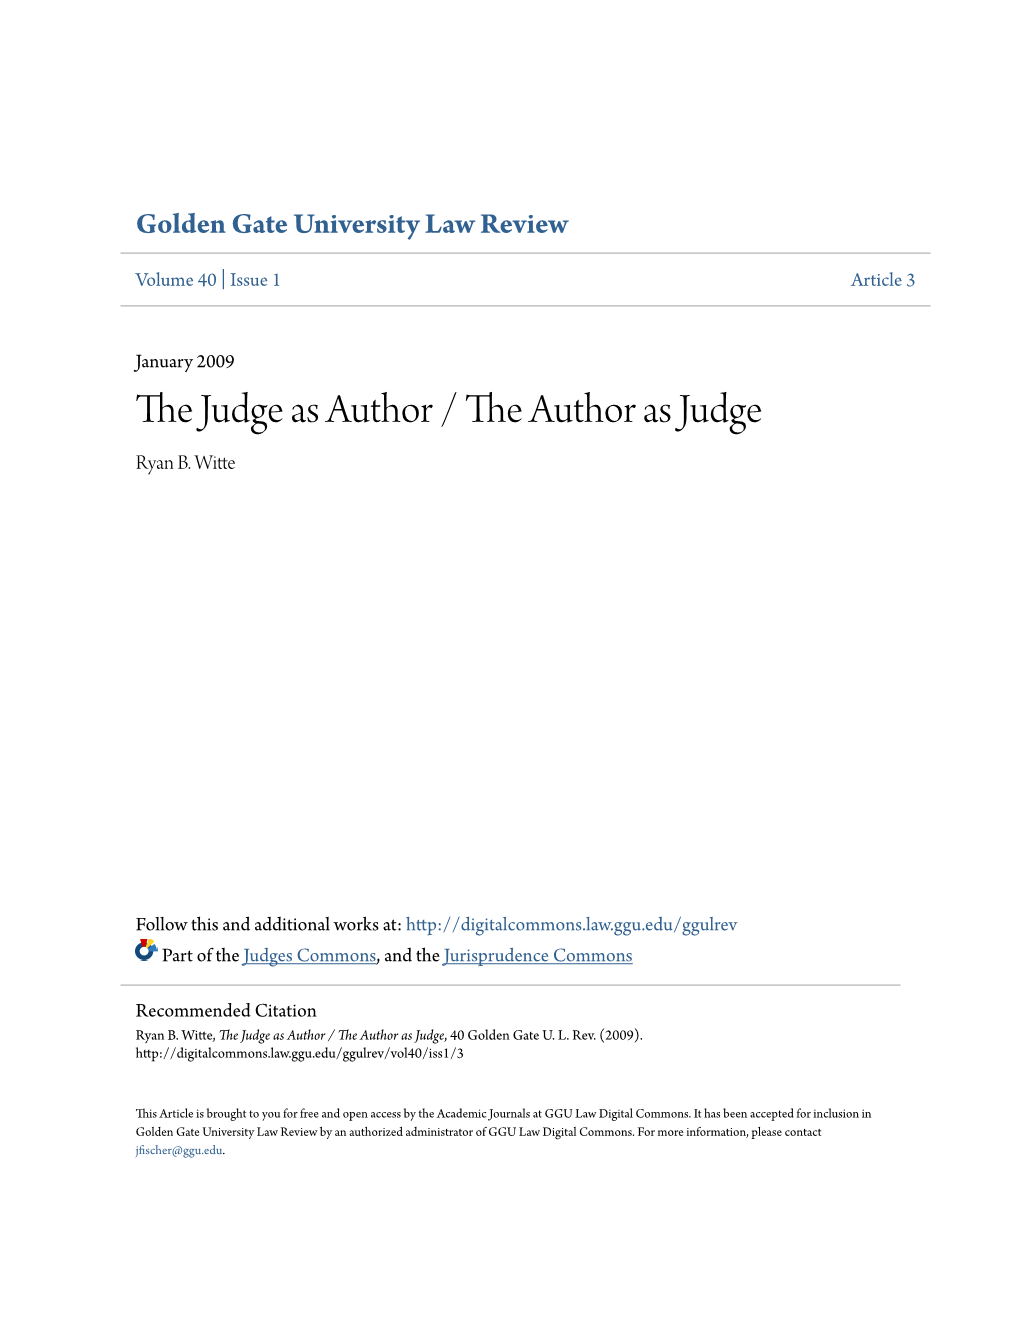 The Judge As Author / the Author As Judge, 40 Golden Gate U